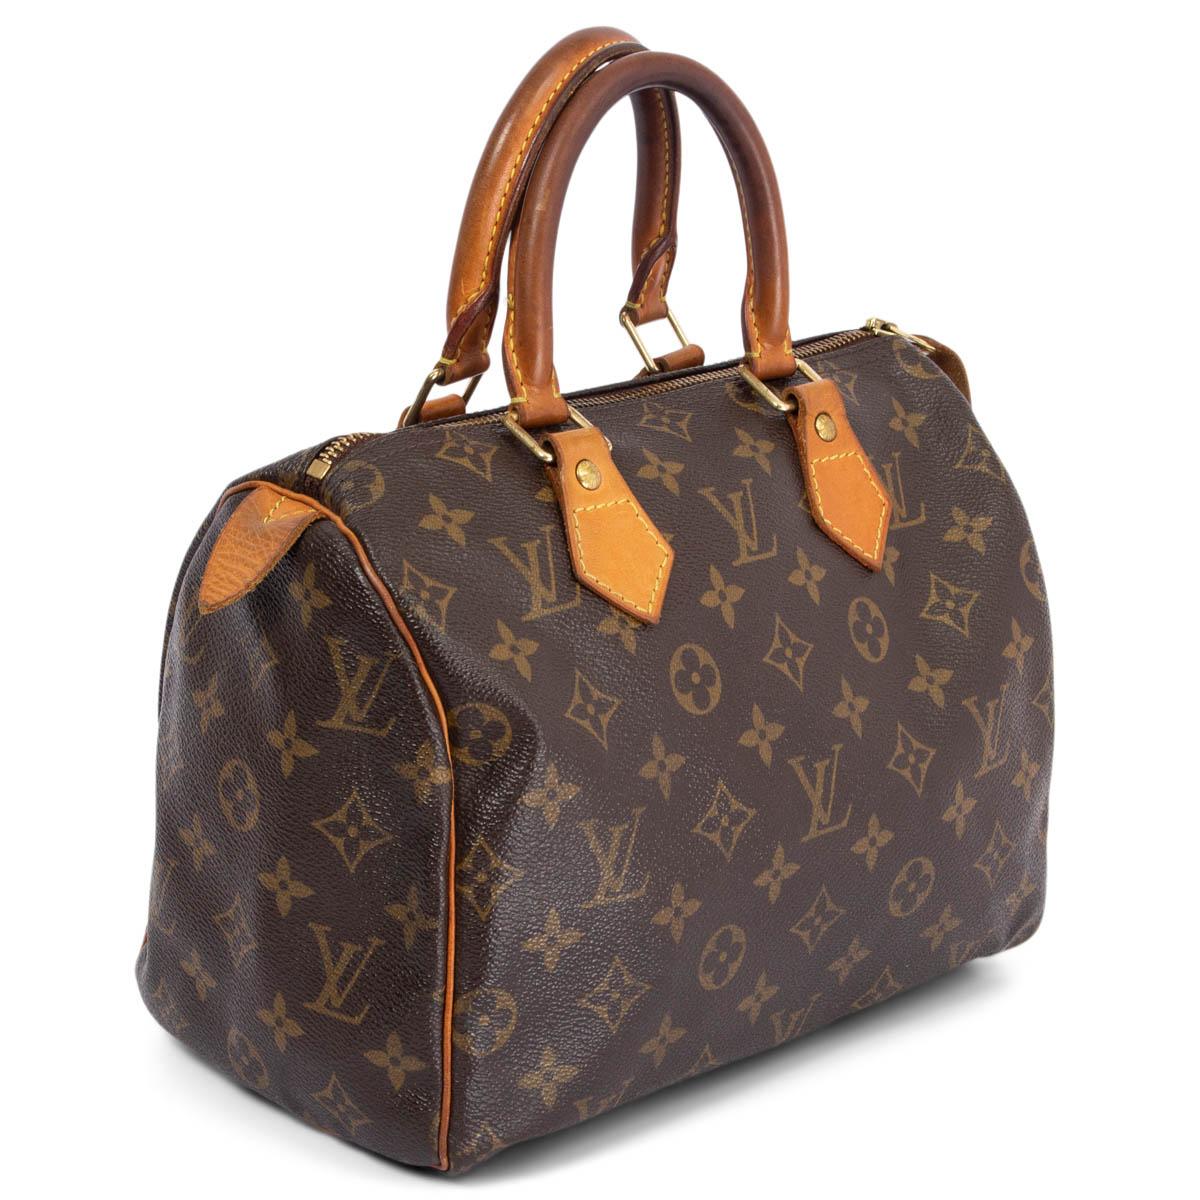 100% authentic Louis Vuitton Speedy 25 in brown Monogram coated canvas. Has been carried with some patina and darkening to the handles and leather trimmings. Overall in good. Comes with dust bag.

Measurements
Height	22cm (8.6in)
Width	25cm